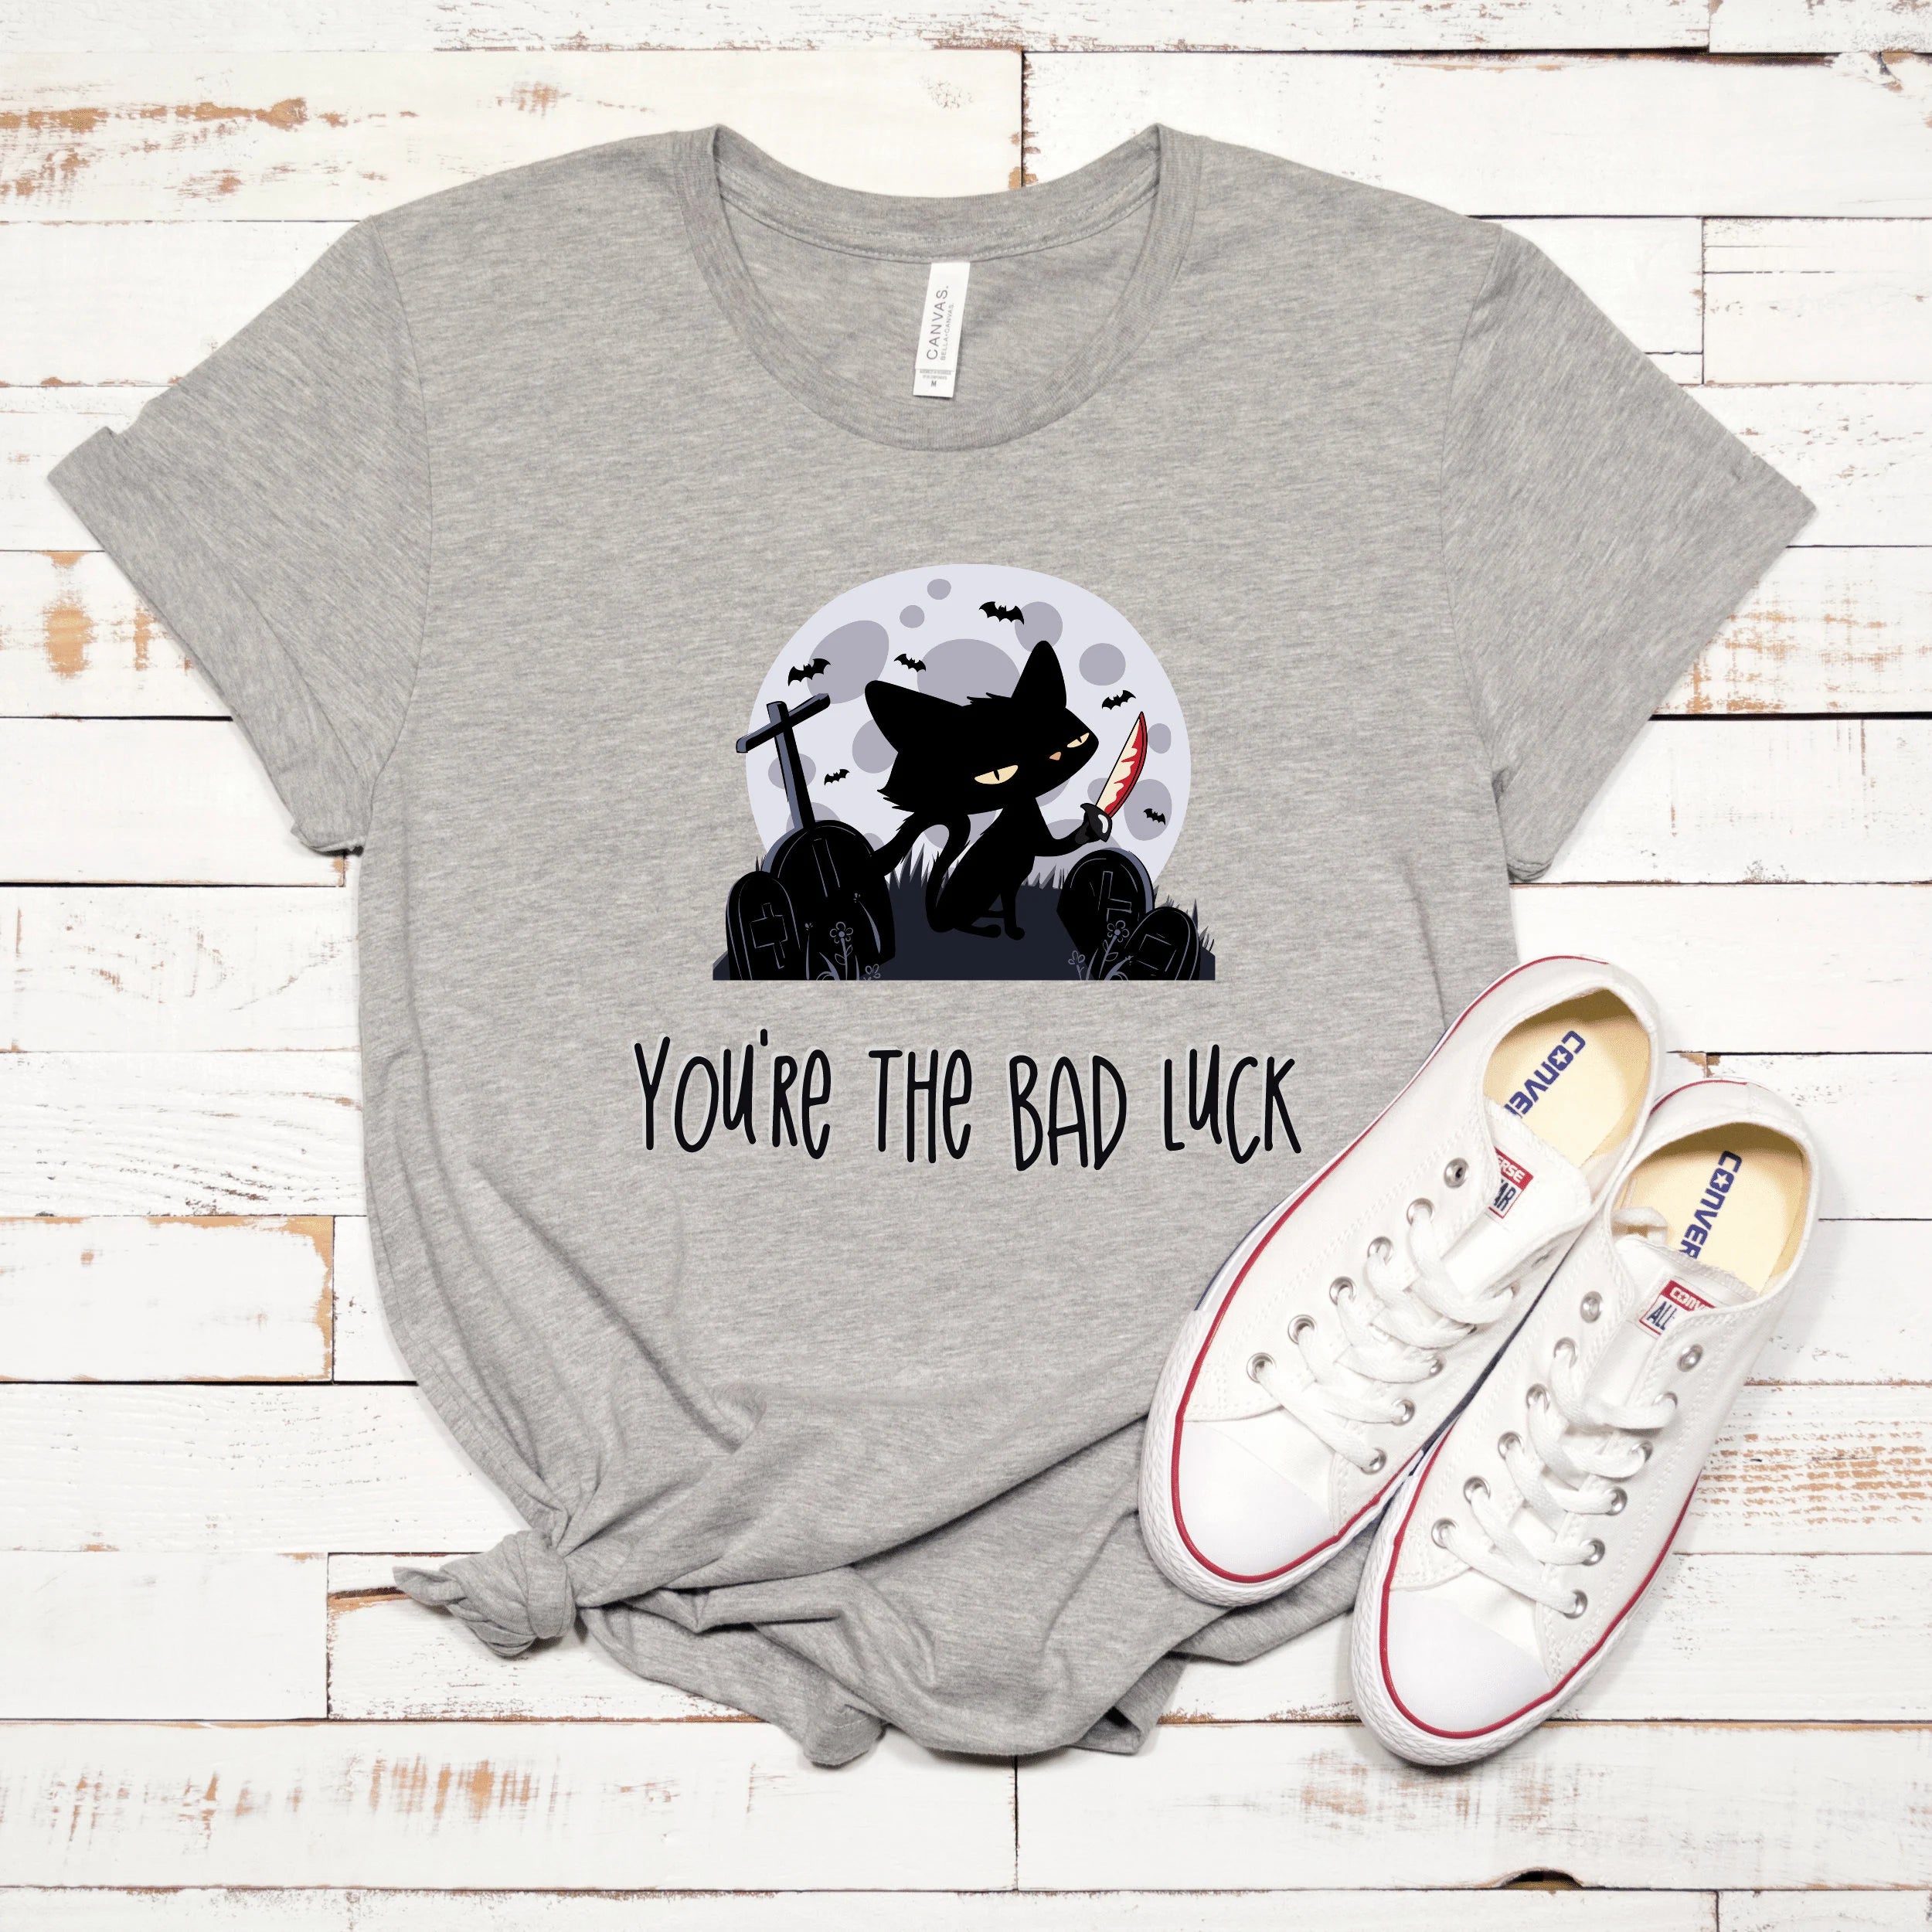 "You're the Bad Luck" Black Cat Halloween T-Shirt